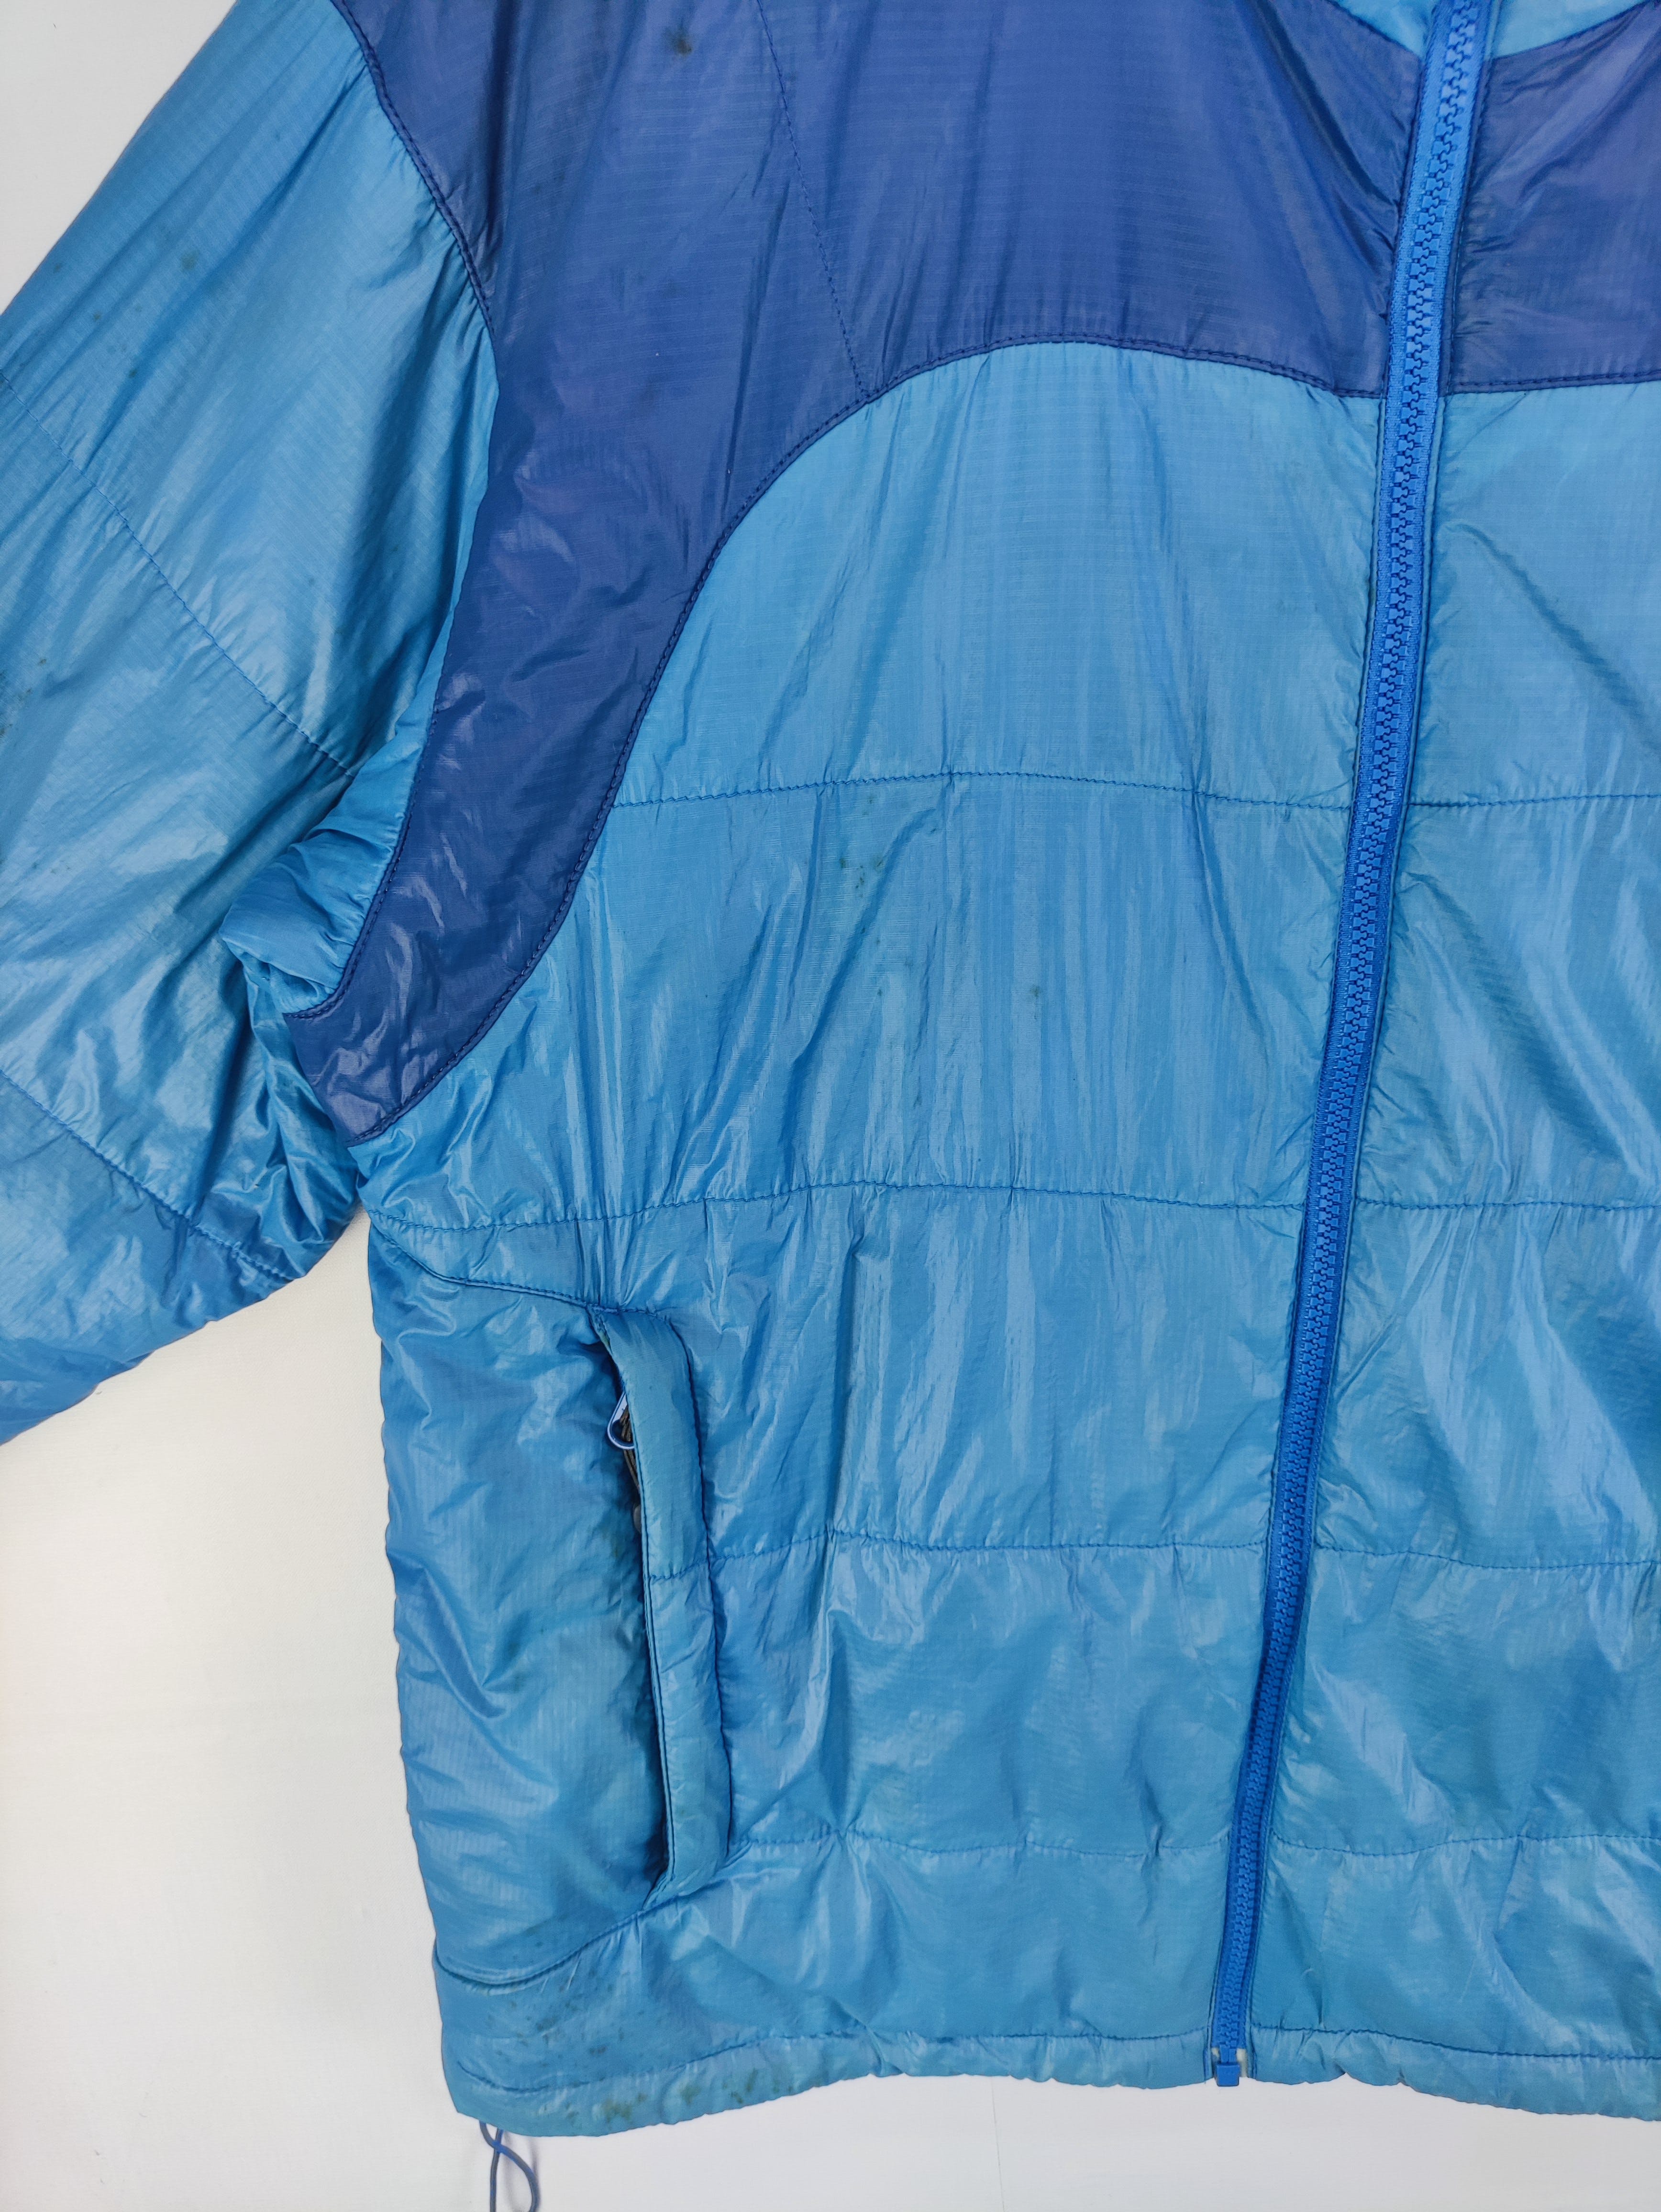 Outdoor Style Go Out! - The North Face Jacket Zipper - 5